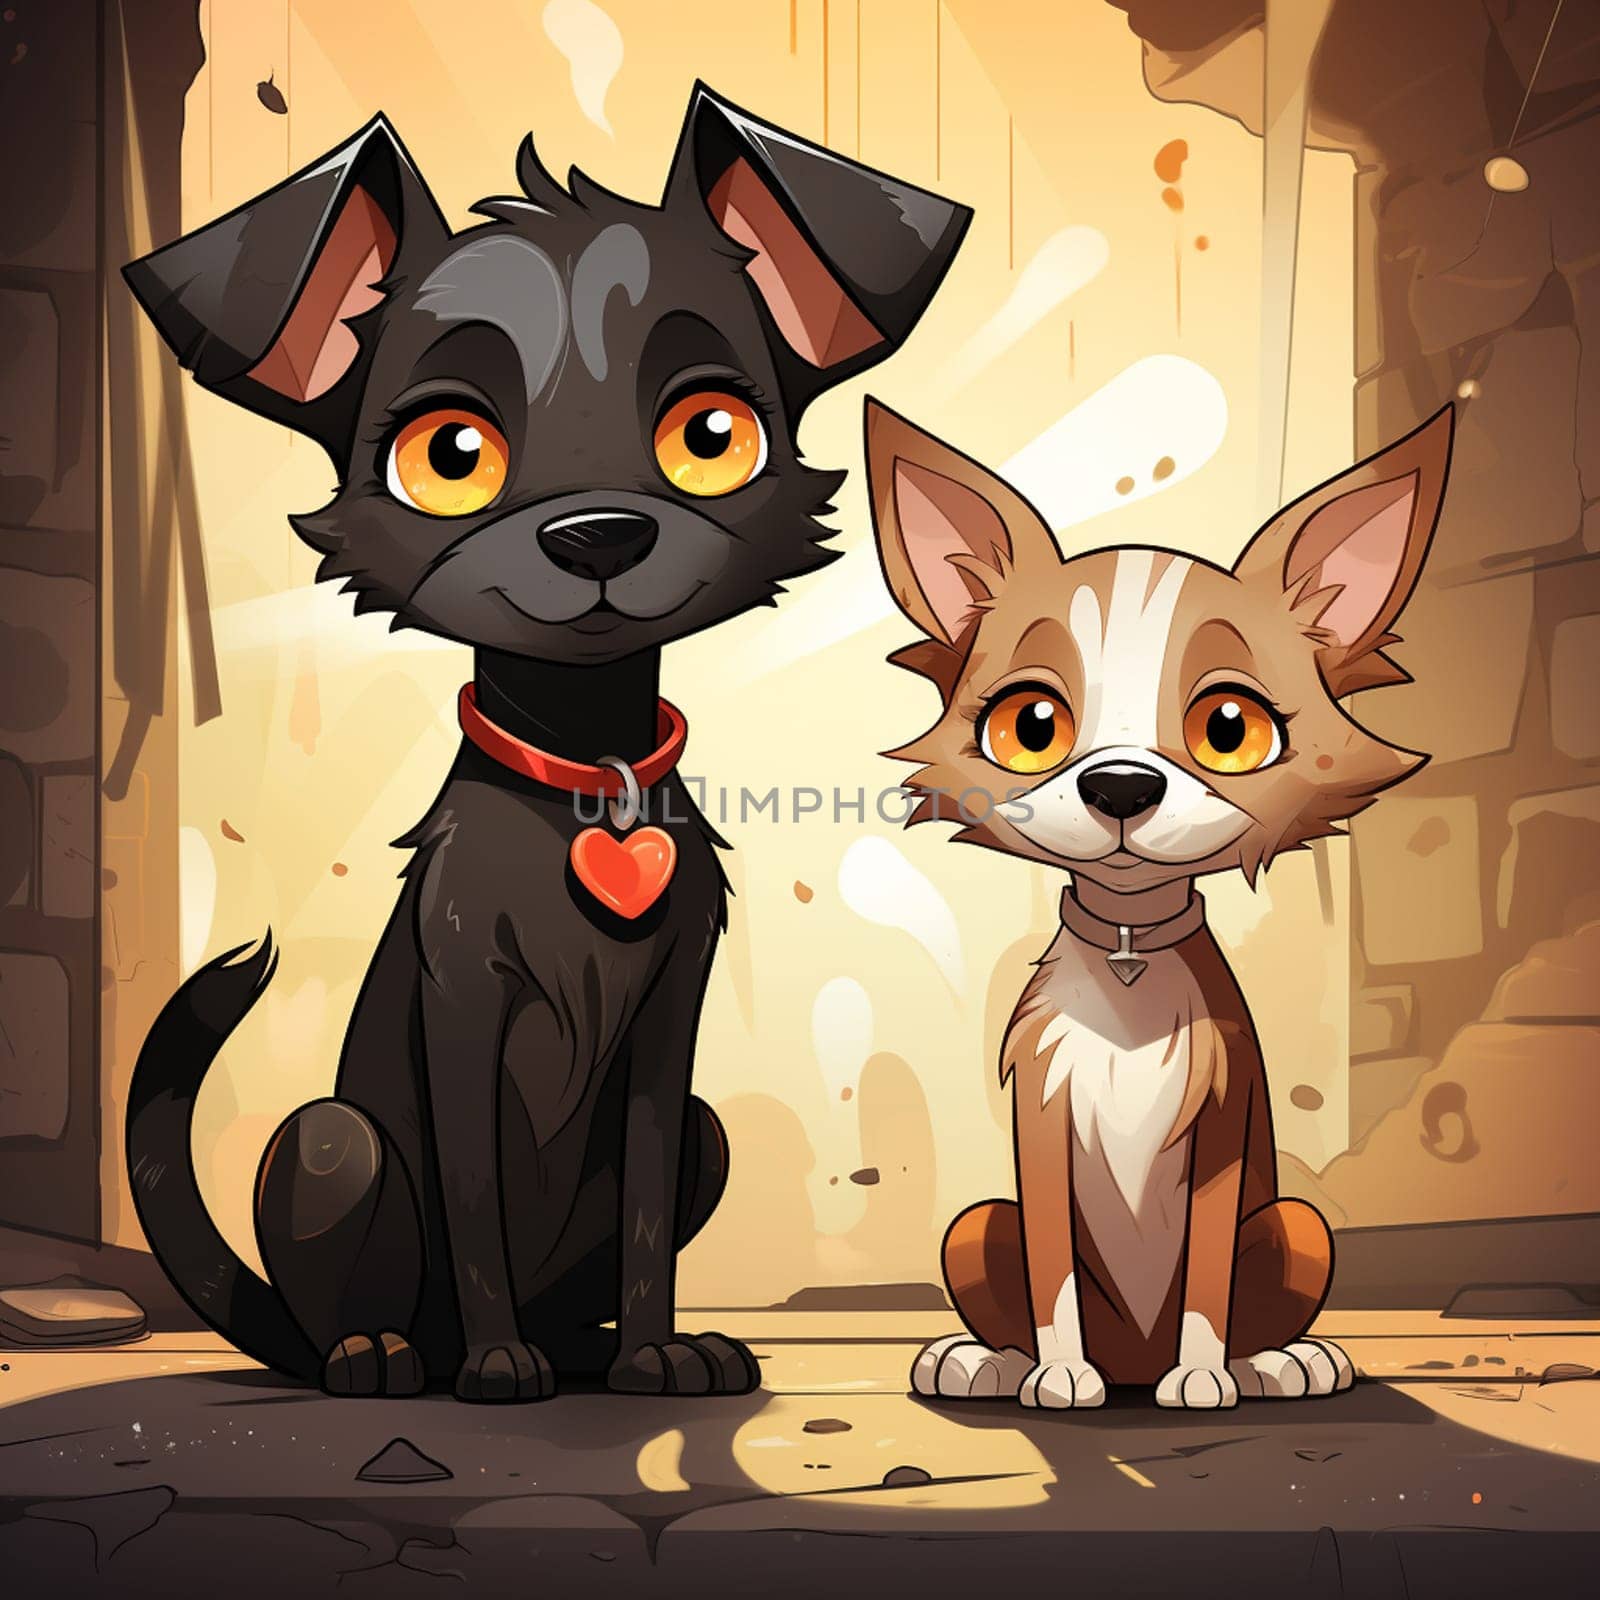 illustration of smiling dog, and cat by Andelov13